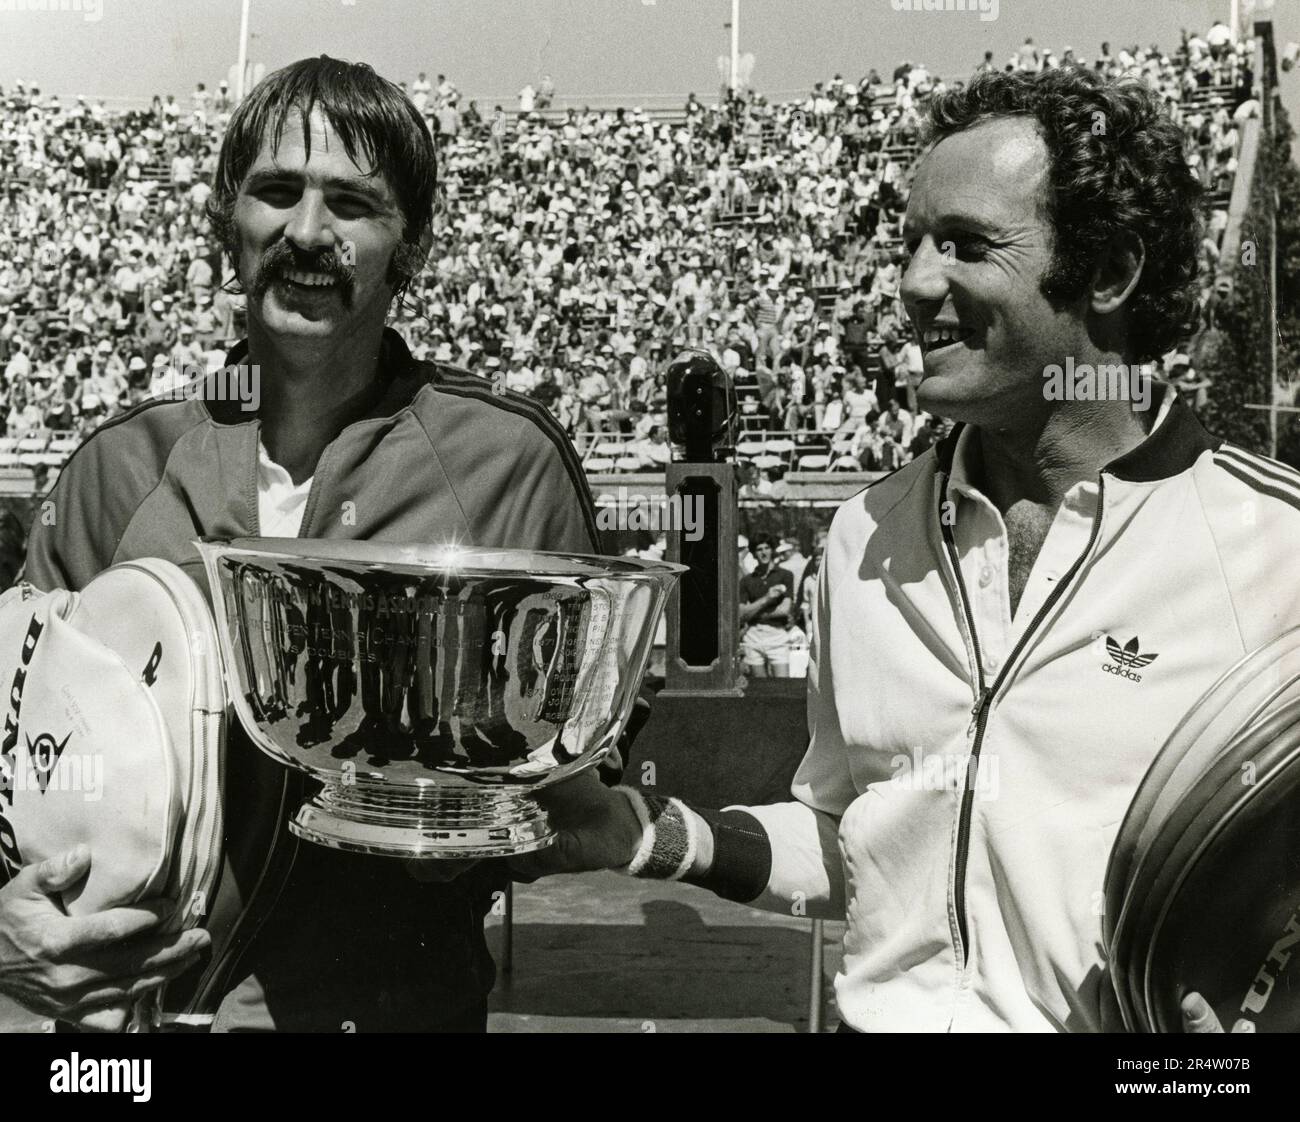 Tennis players John Newcombe and Tom Okker after winning the double of the French Open, Roland Garros, France 1973 Stock Photo